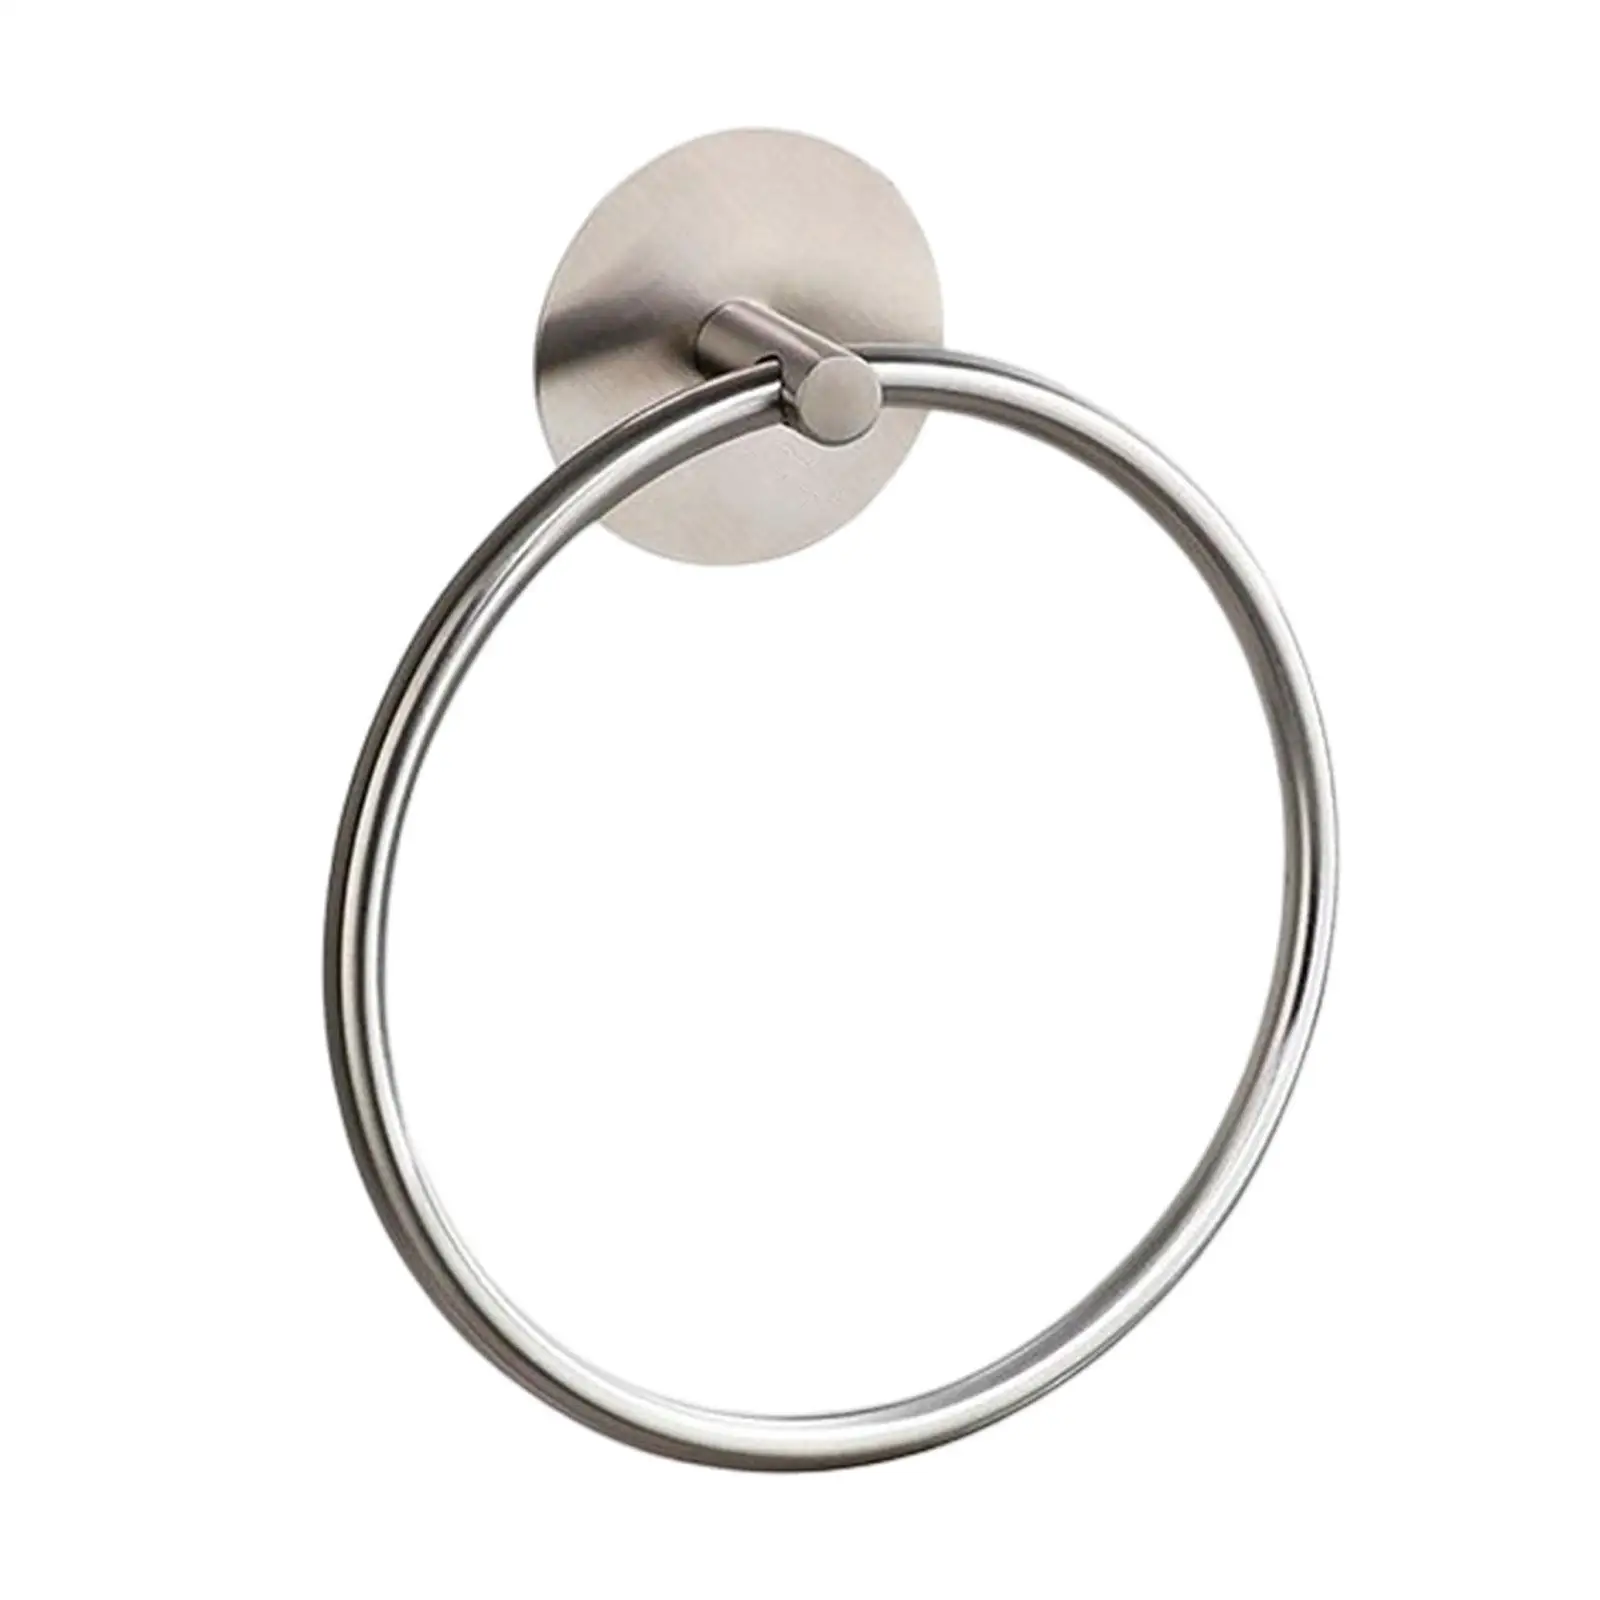 Simple Towel Ring Towel Holder Wall Mounted Stainless Steel Rack Hanger Storage Bath Round Circle for Hotel Kitchen Accessories